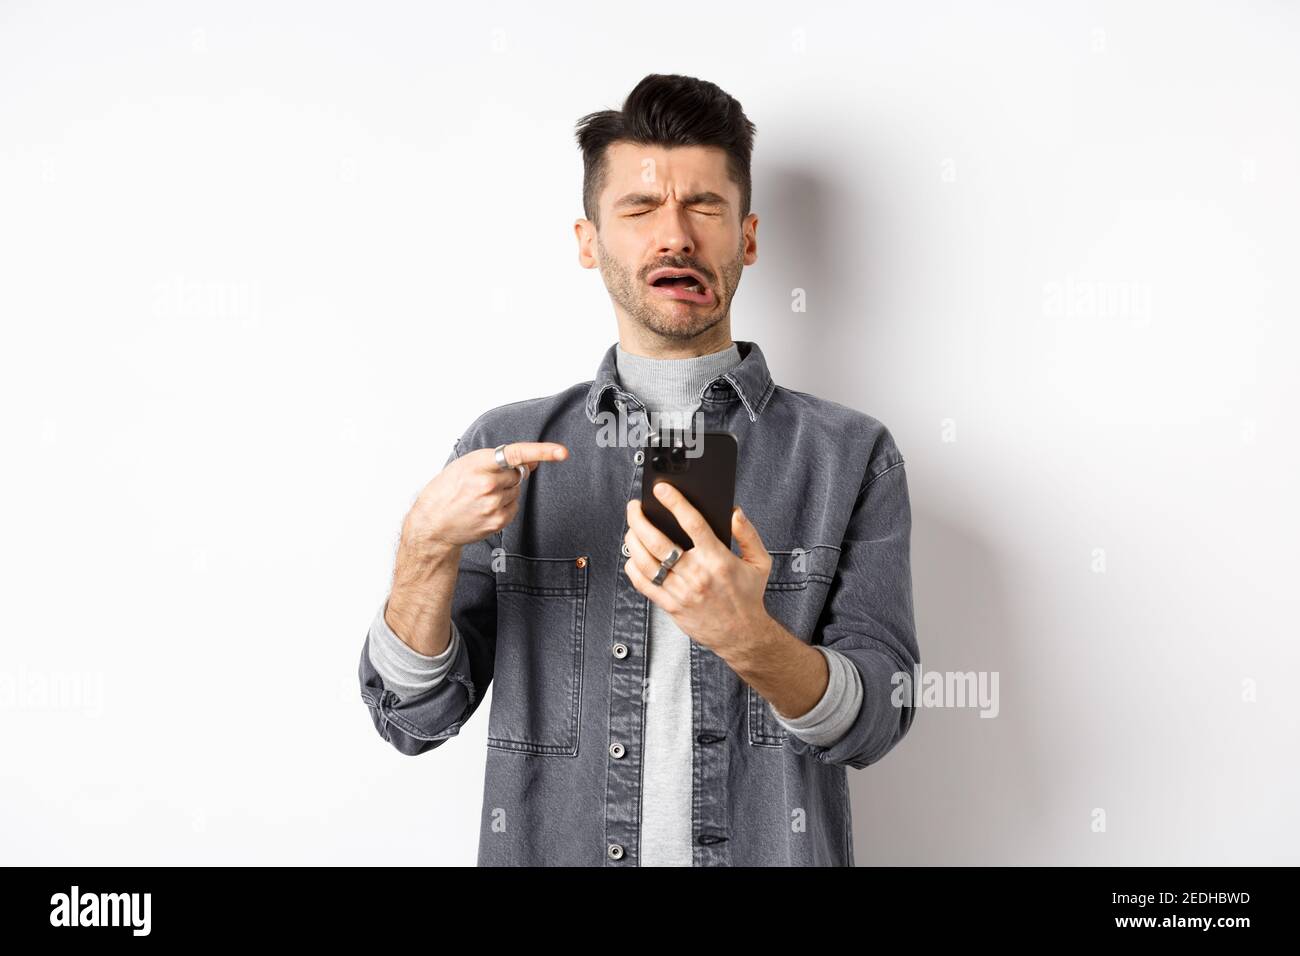 Sad crying guy pointing at smartphone and sobbing, complaining or feeling miserable, standing on white background Stock Photo